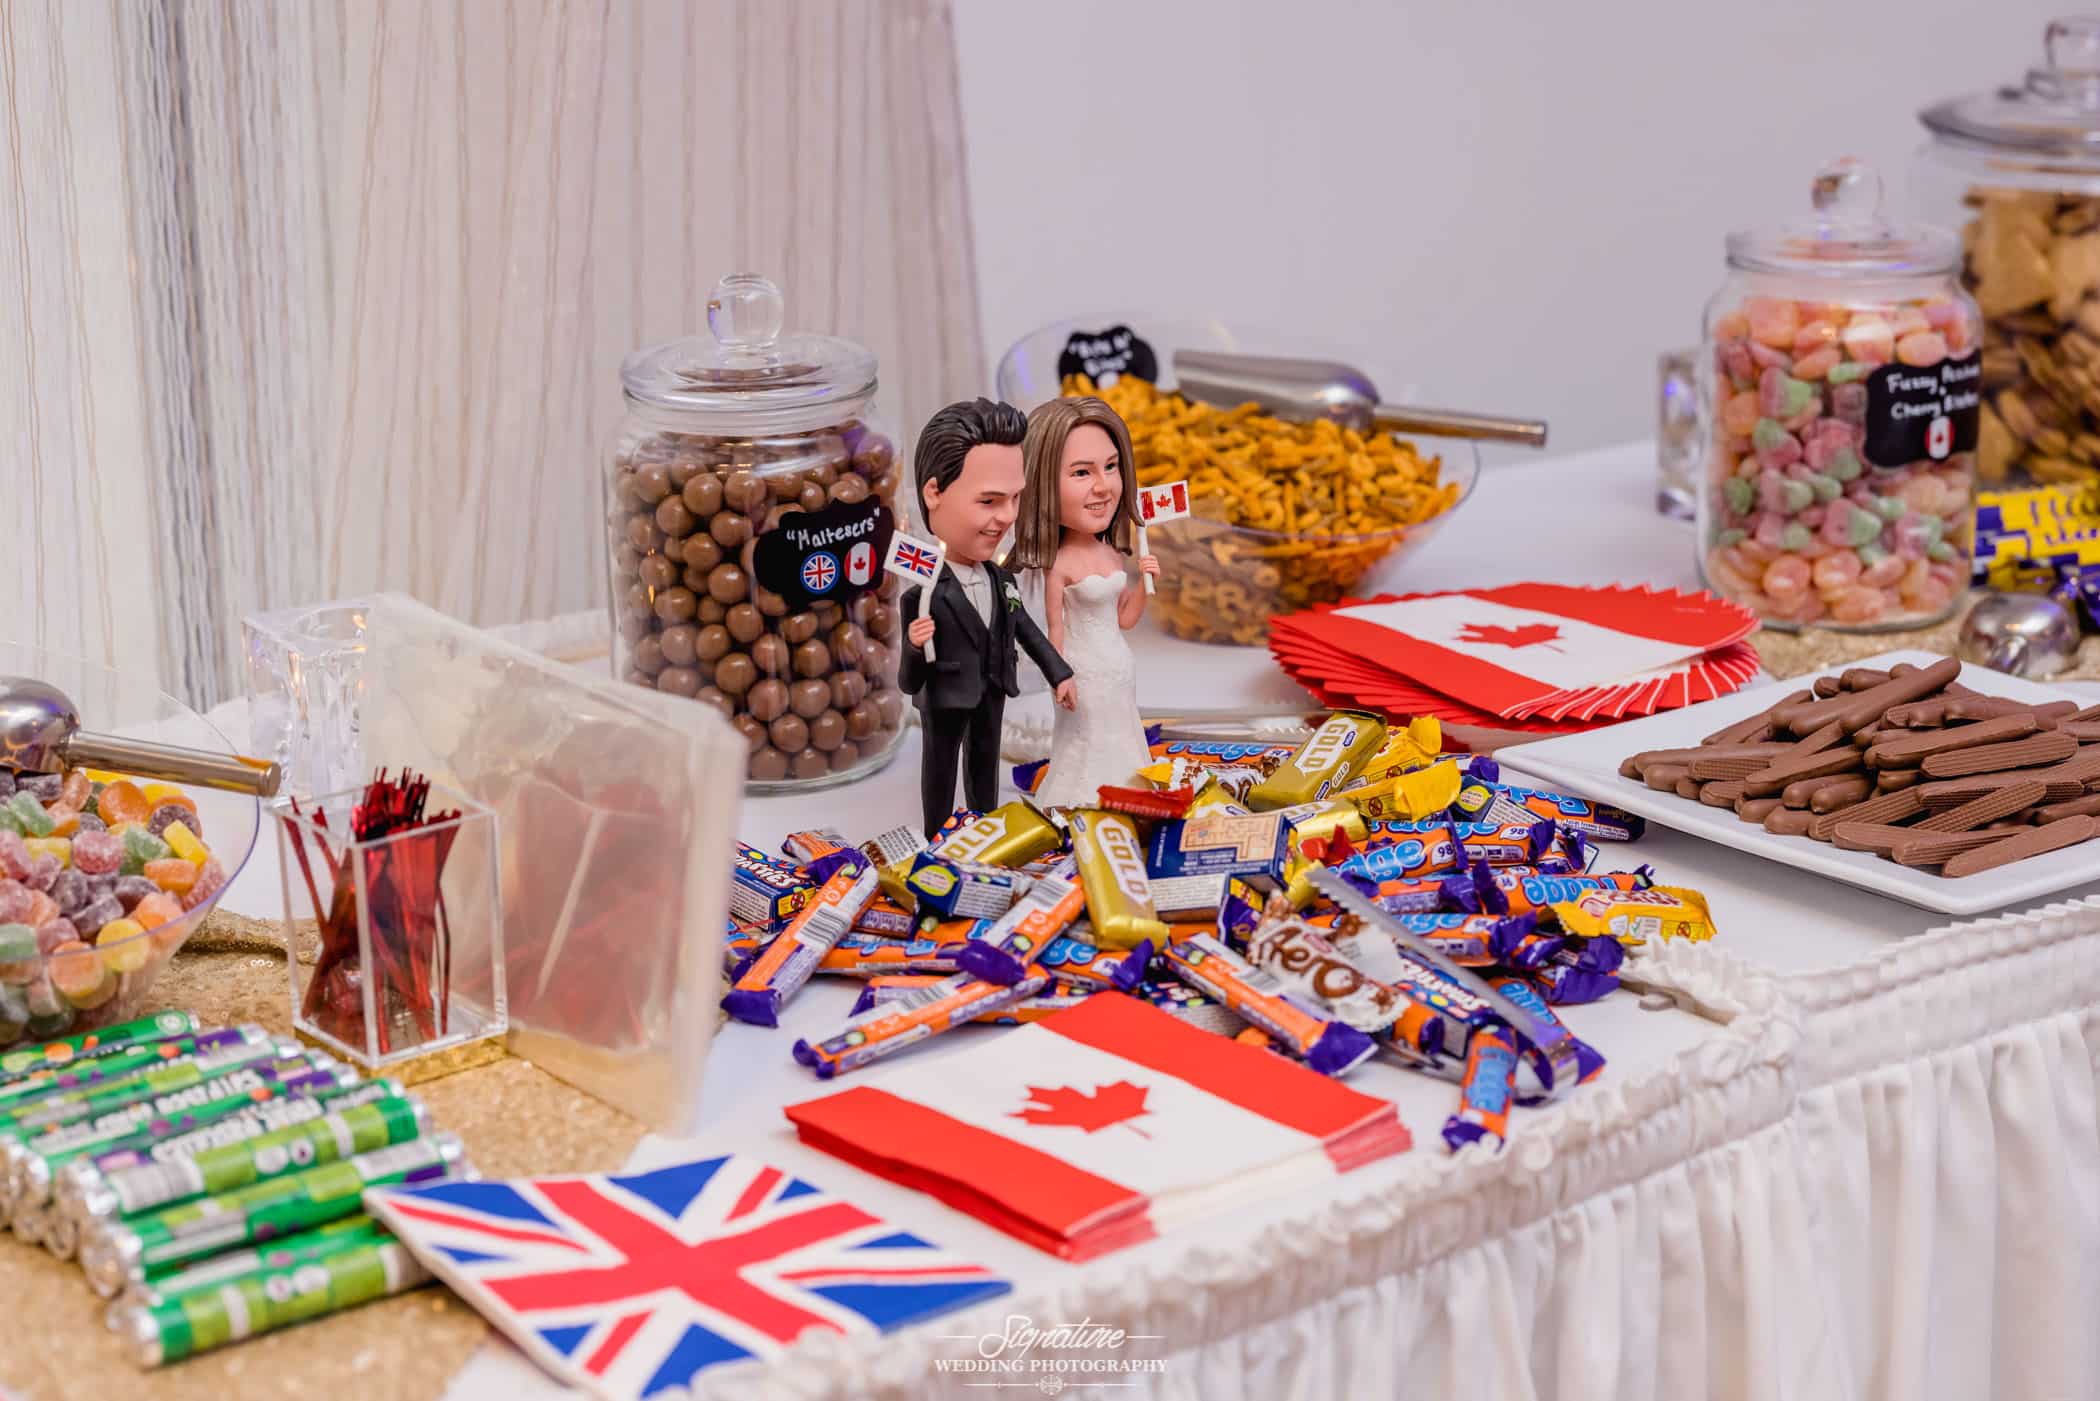 Sweets table during reception